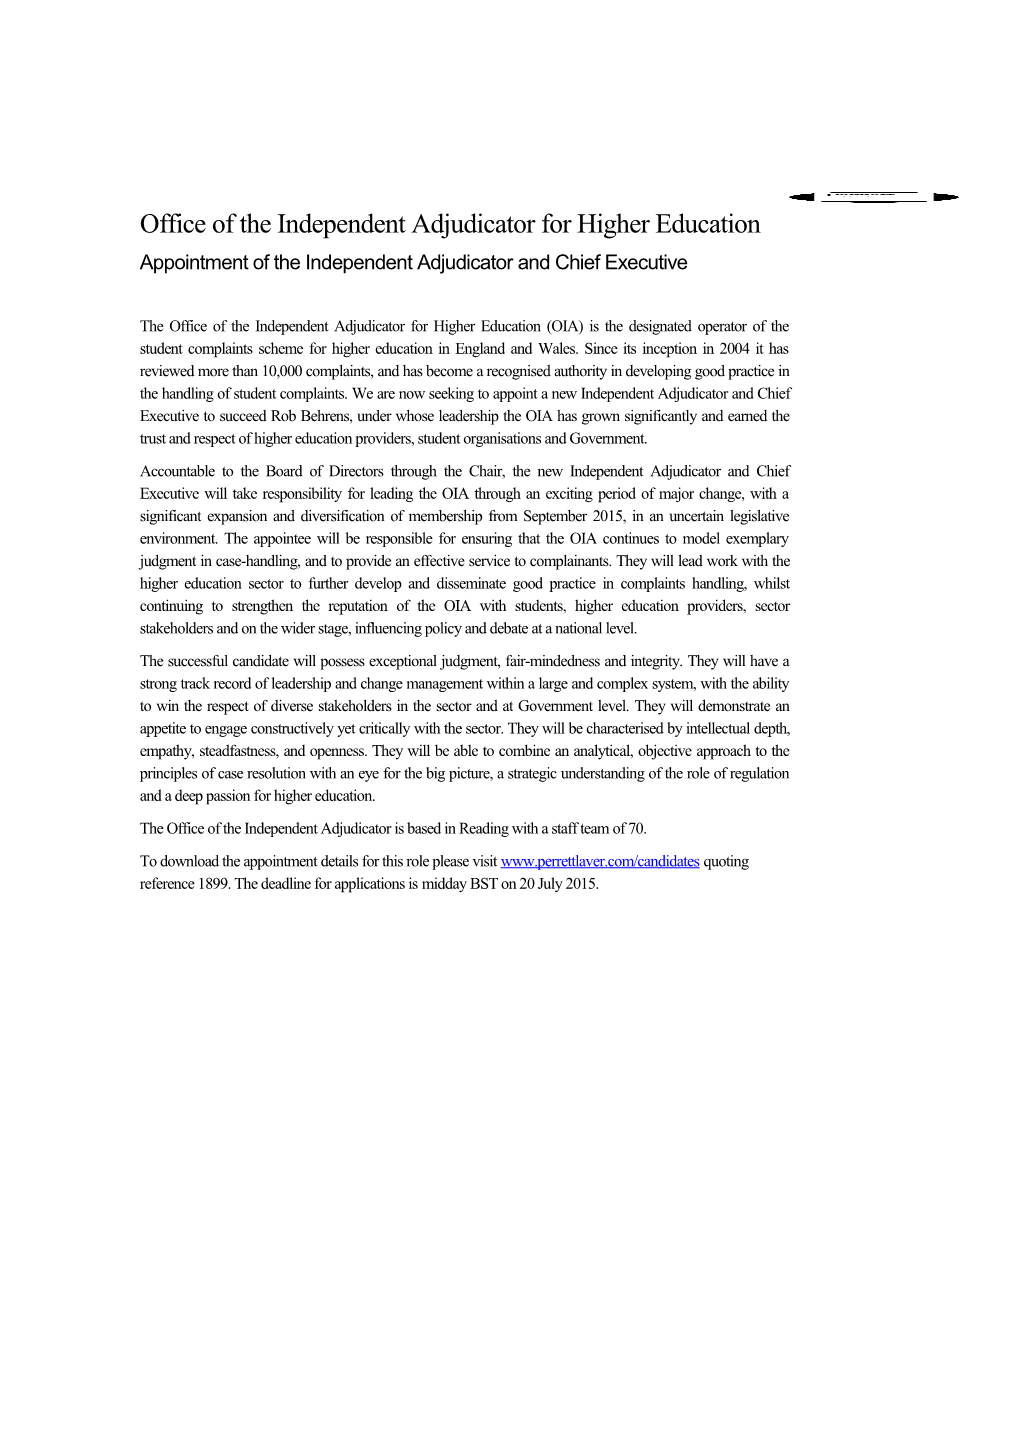 Office of the Independent Adjudicator for Higher Education